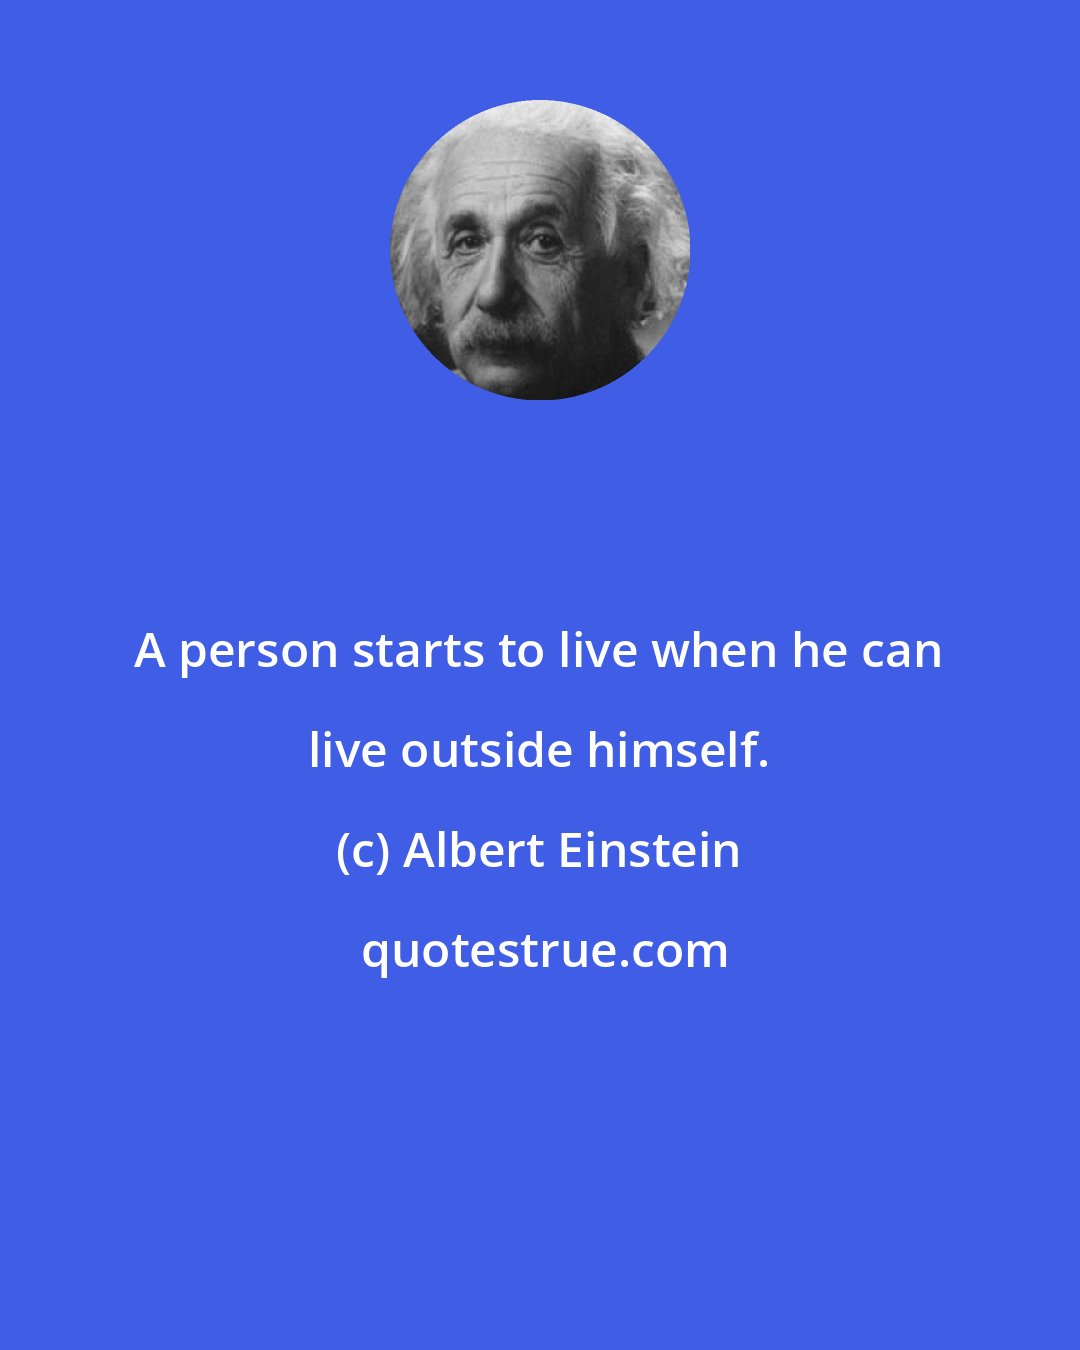 Albert Einstein: A person starts to live when he can live outside himself.